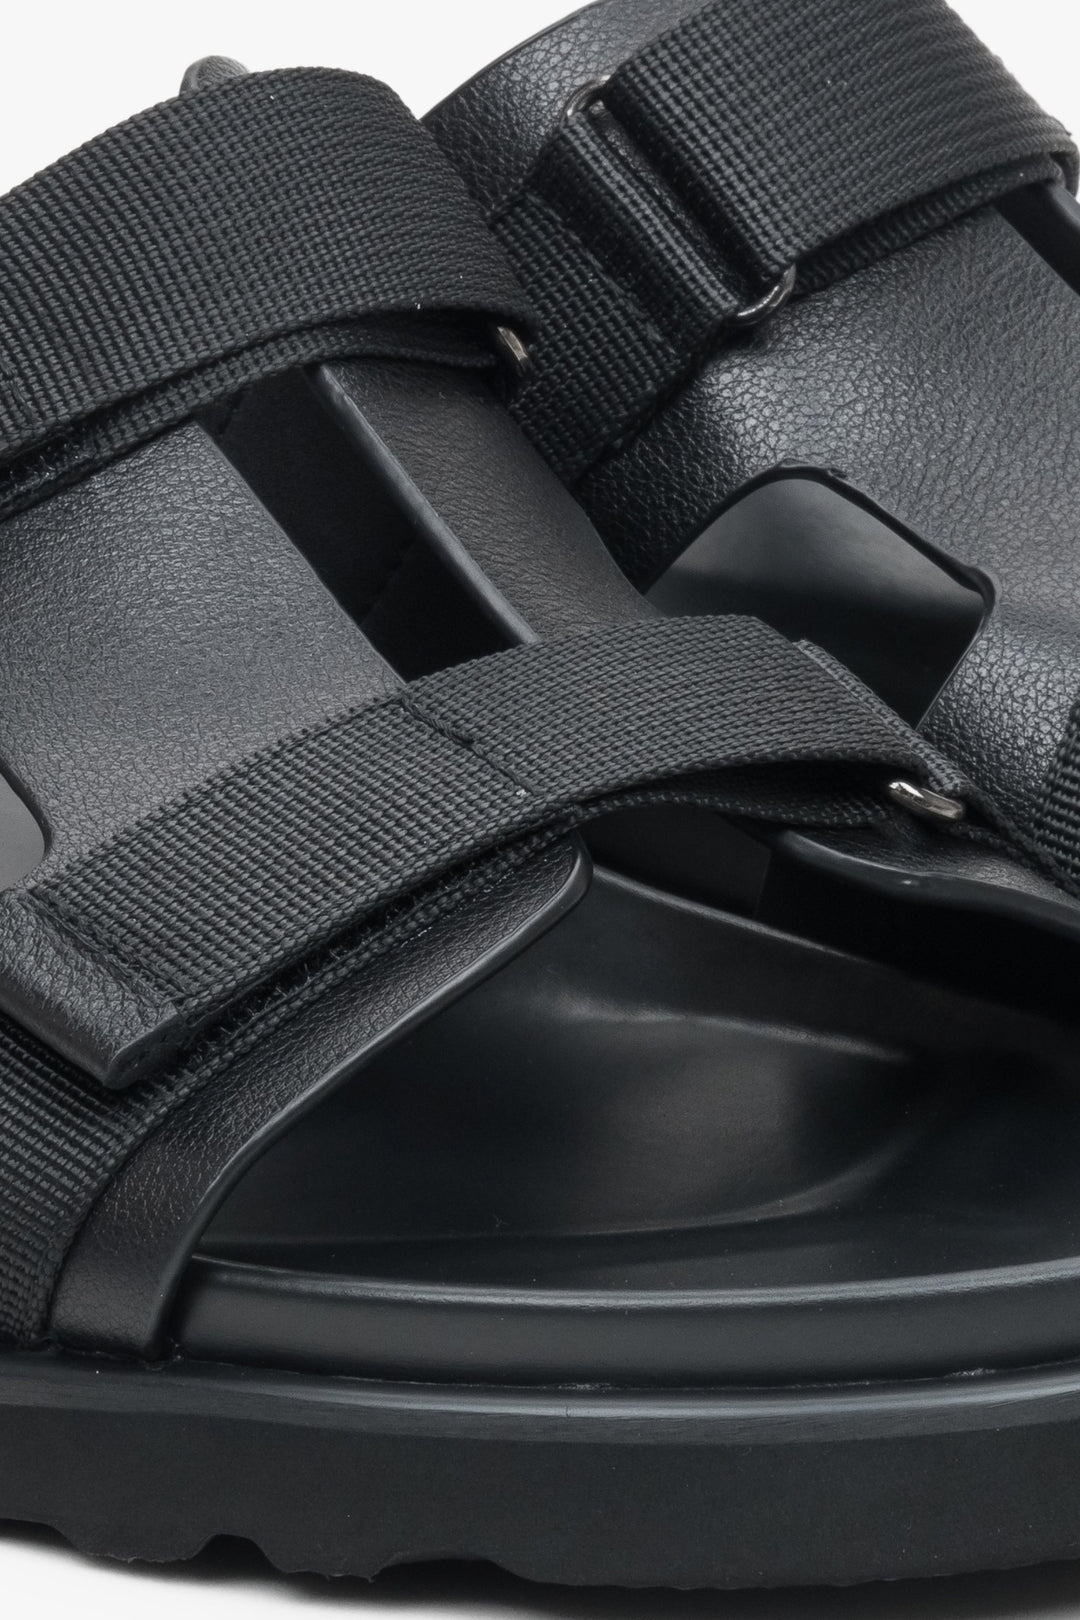 Estro men's black leather sandals - close-up on the fastening system and details.